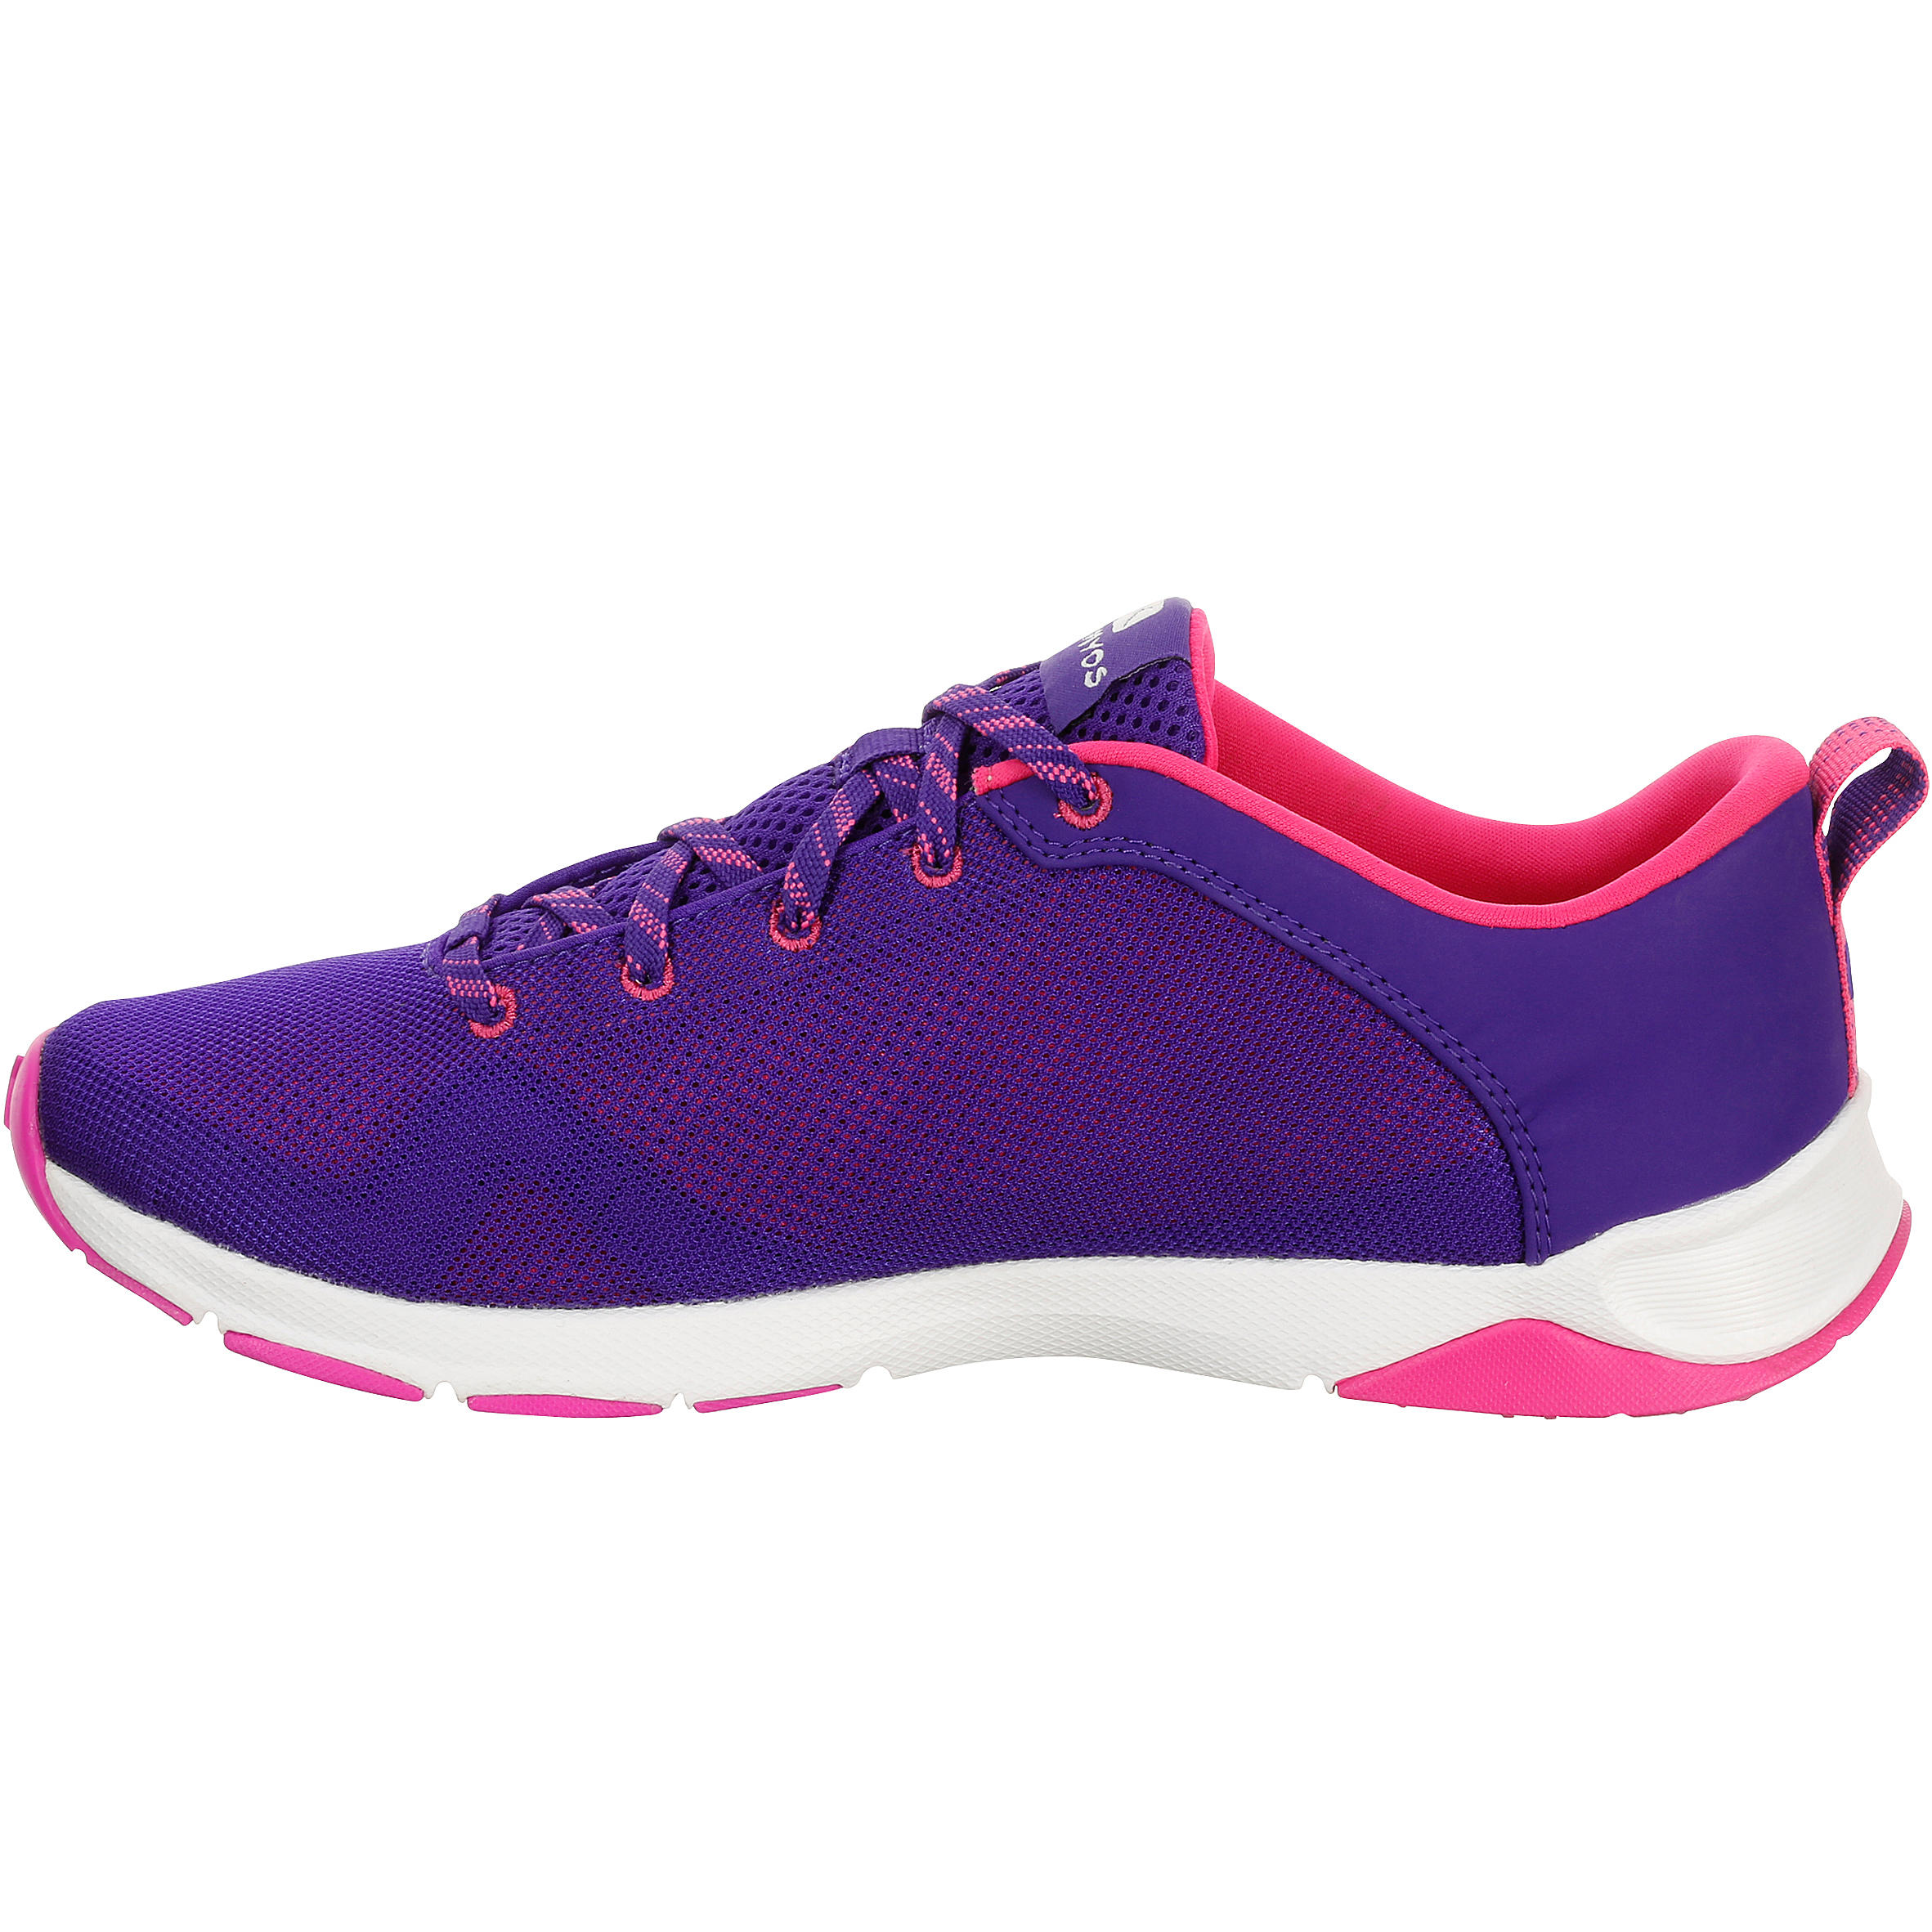 purple and pink tennis shoes